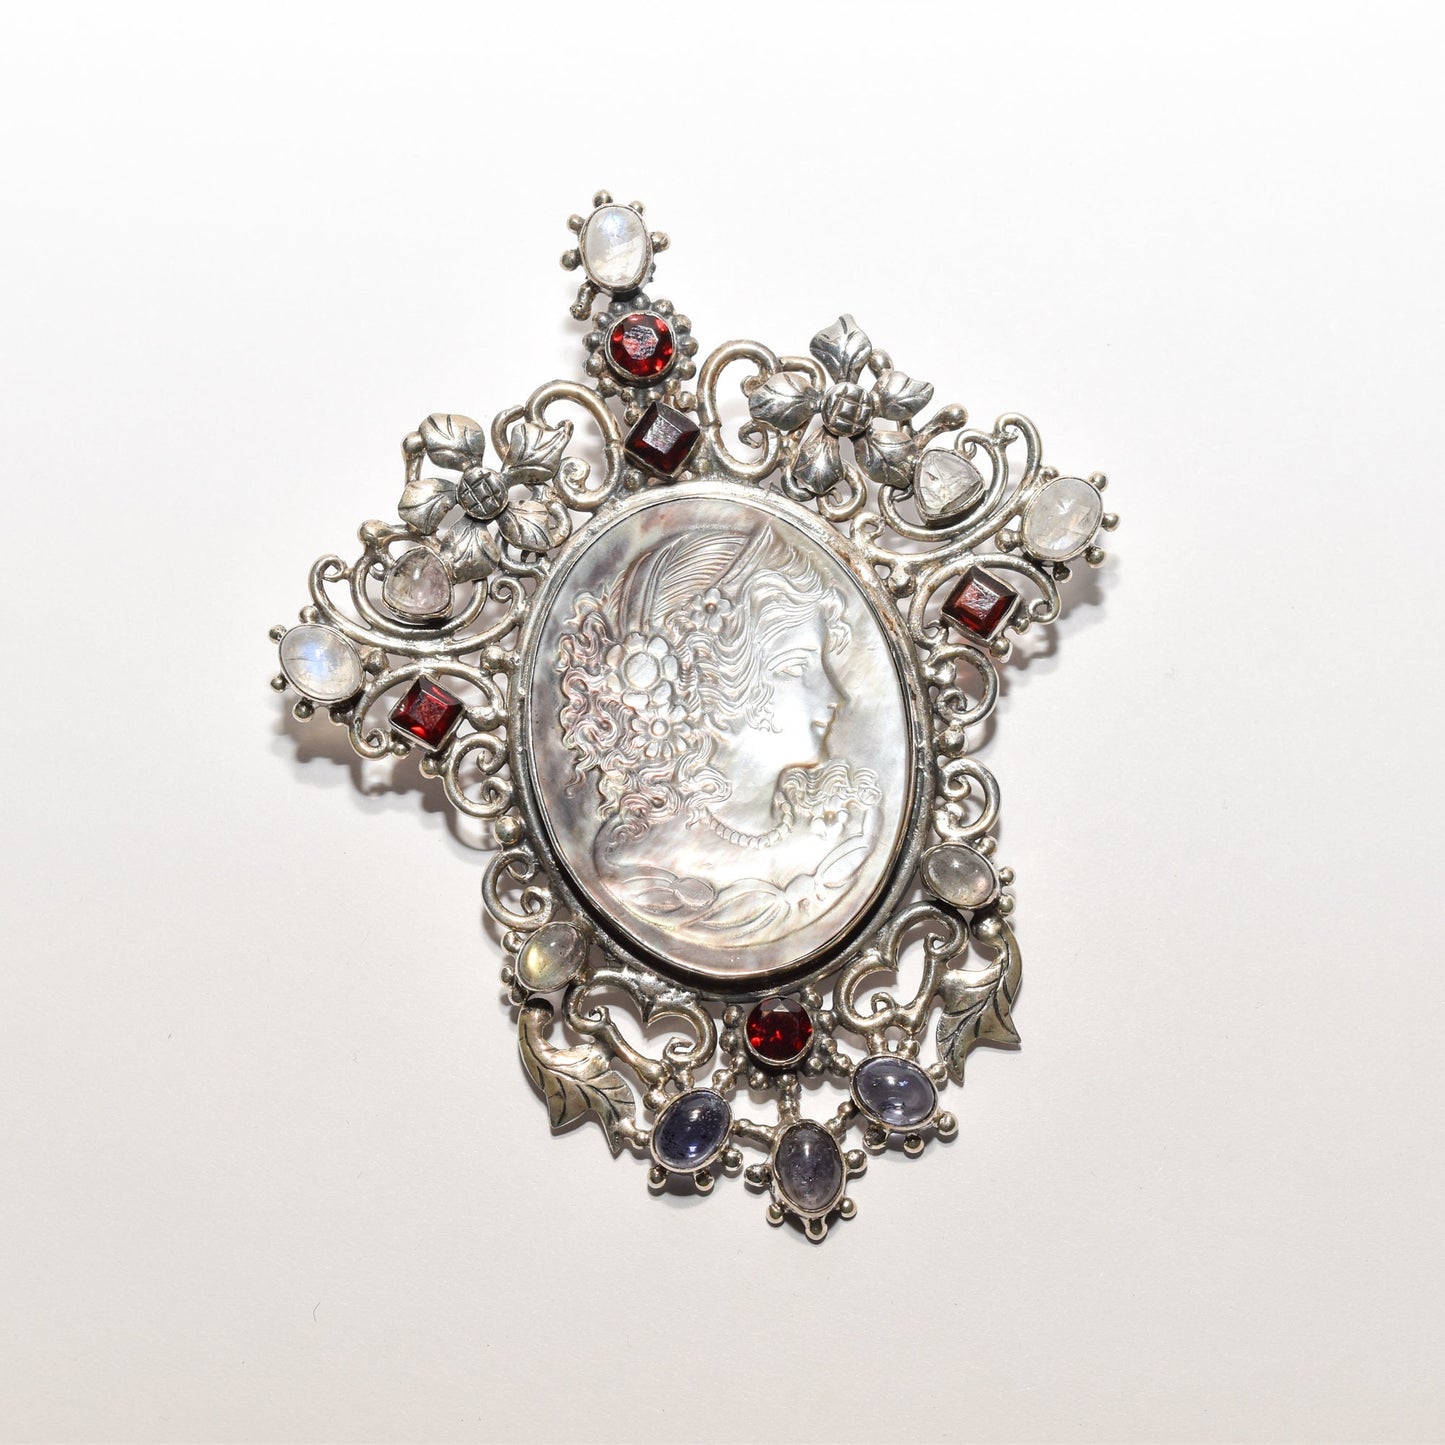 Victorian style sterling silver cameo pendant brooch with ornate multi-stone design and large profile centerpiece, measuring 4 inches in length.